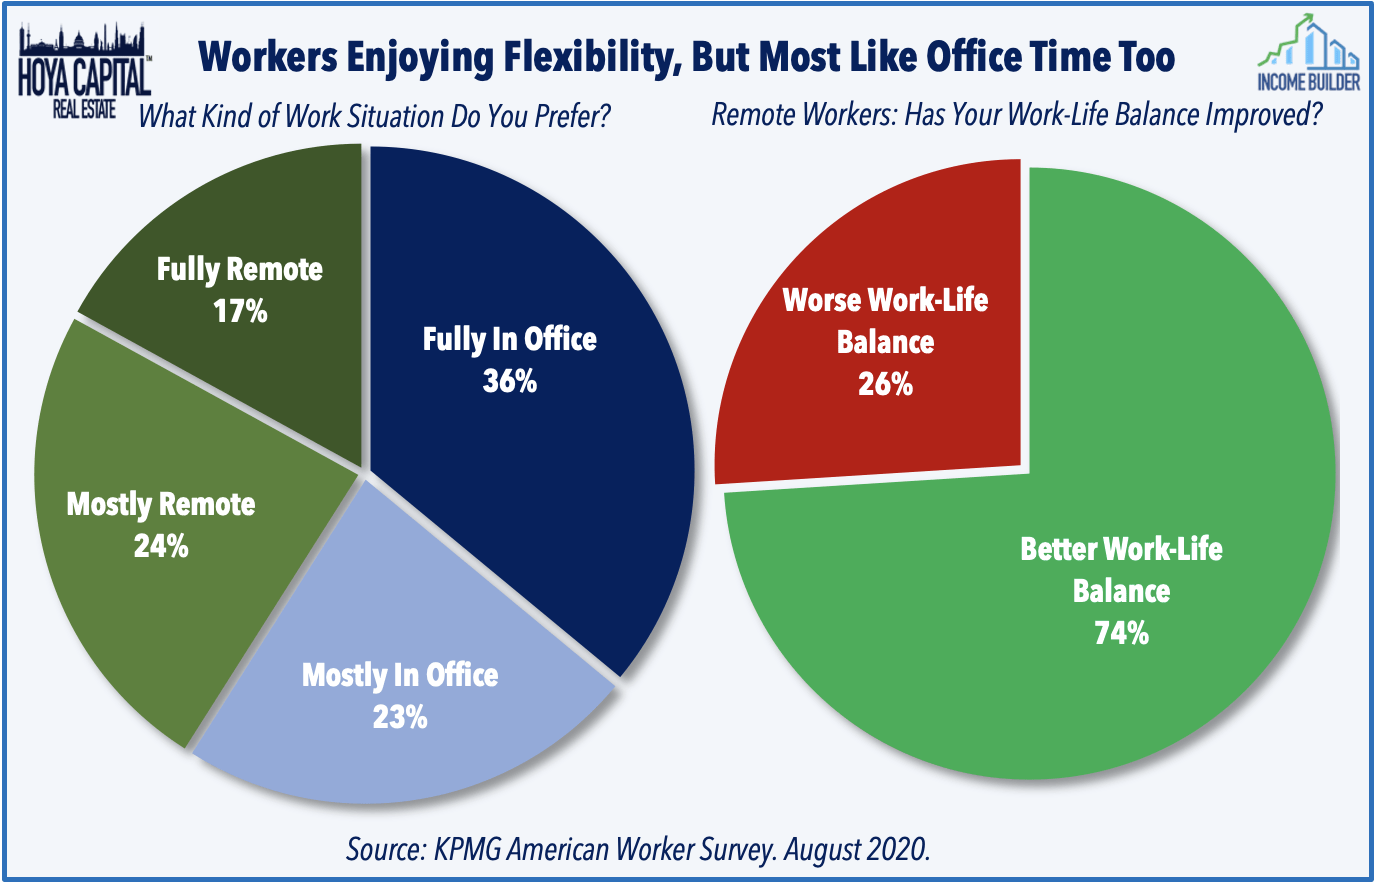 Pie chart showing nearly two-thirds of workers want at least some remote work, and 74% say their work-life balance has improved